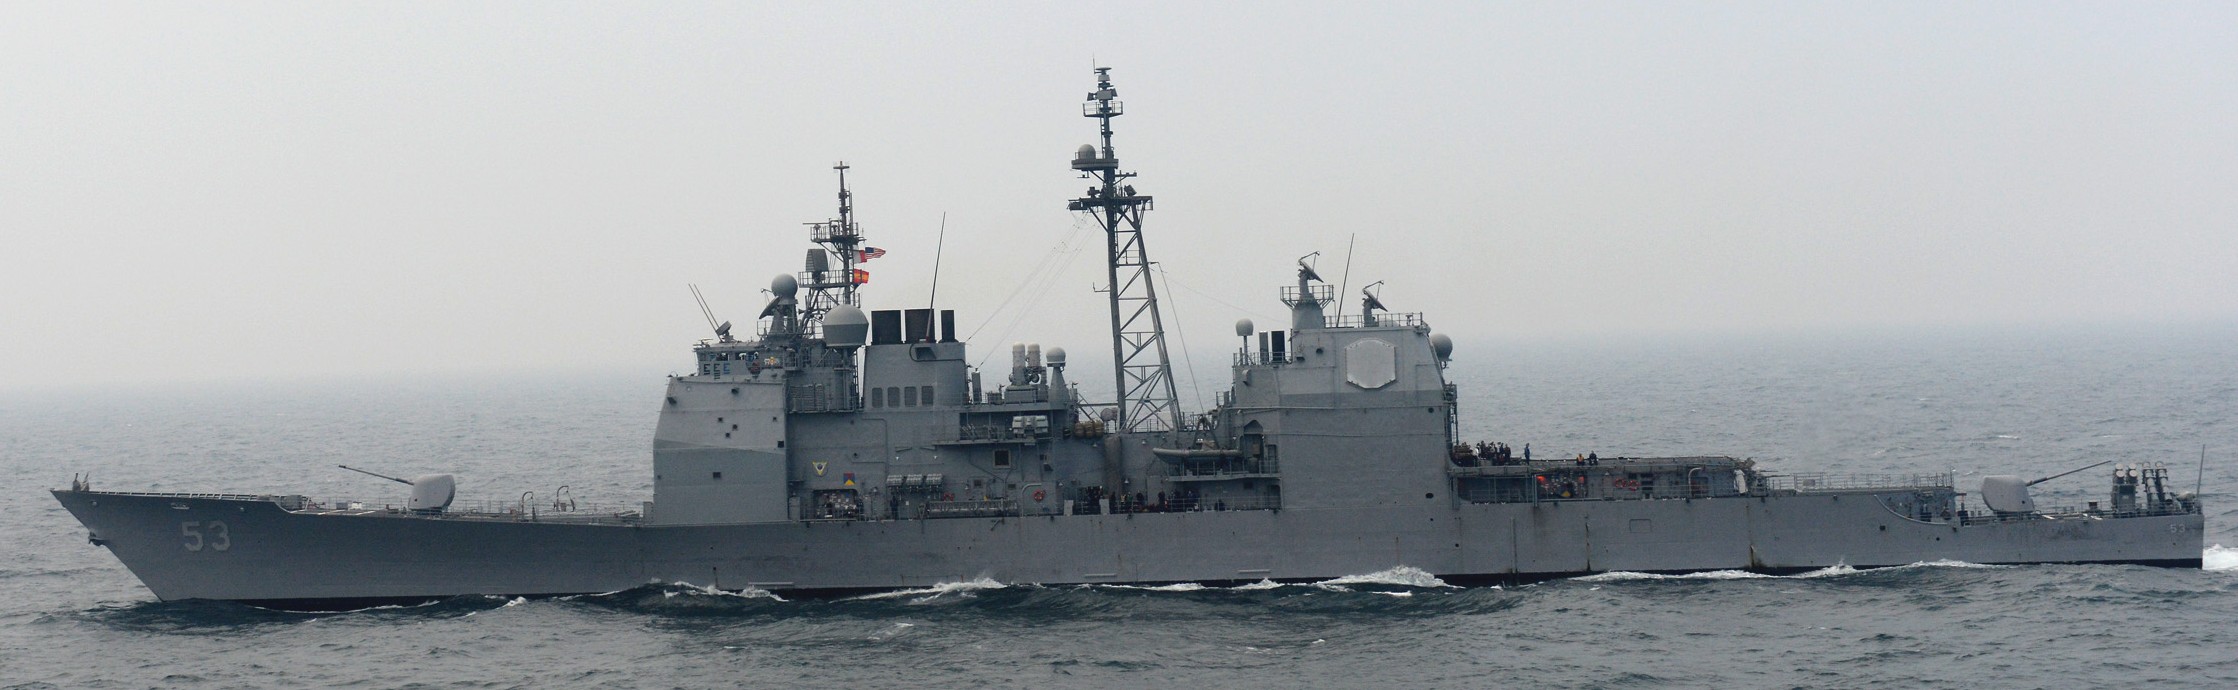 cg-53 uss mobile bay ticonderoga class guided missile cruiser aegis us navy 60